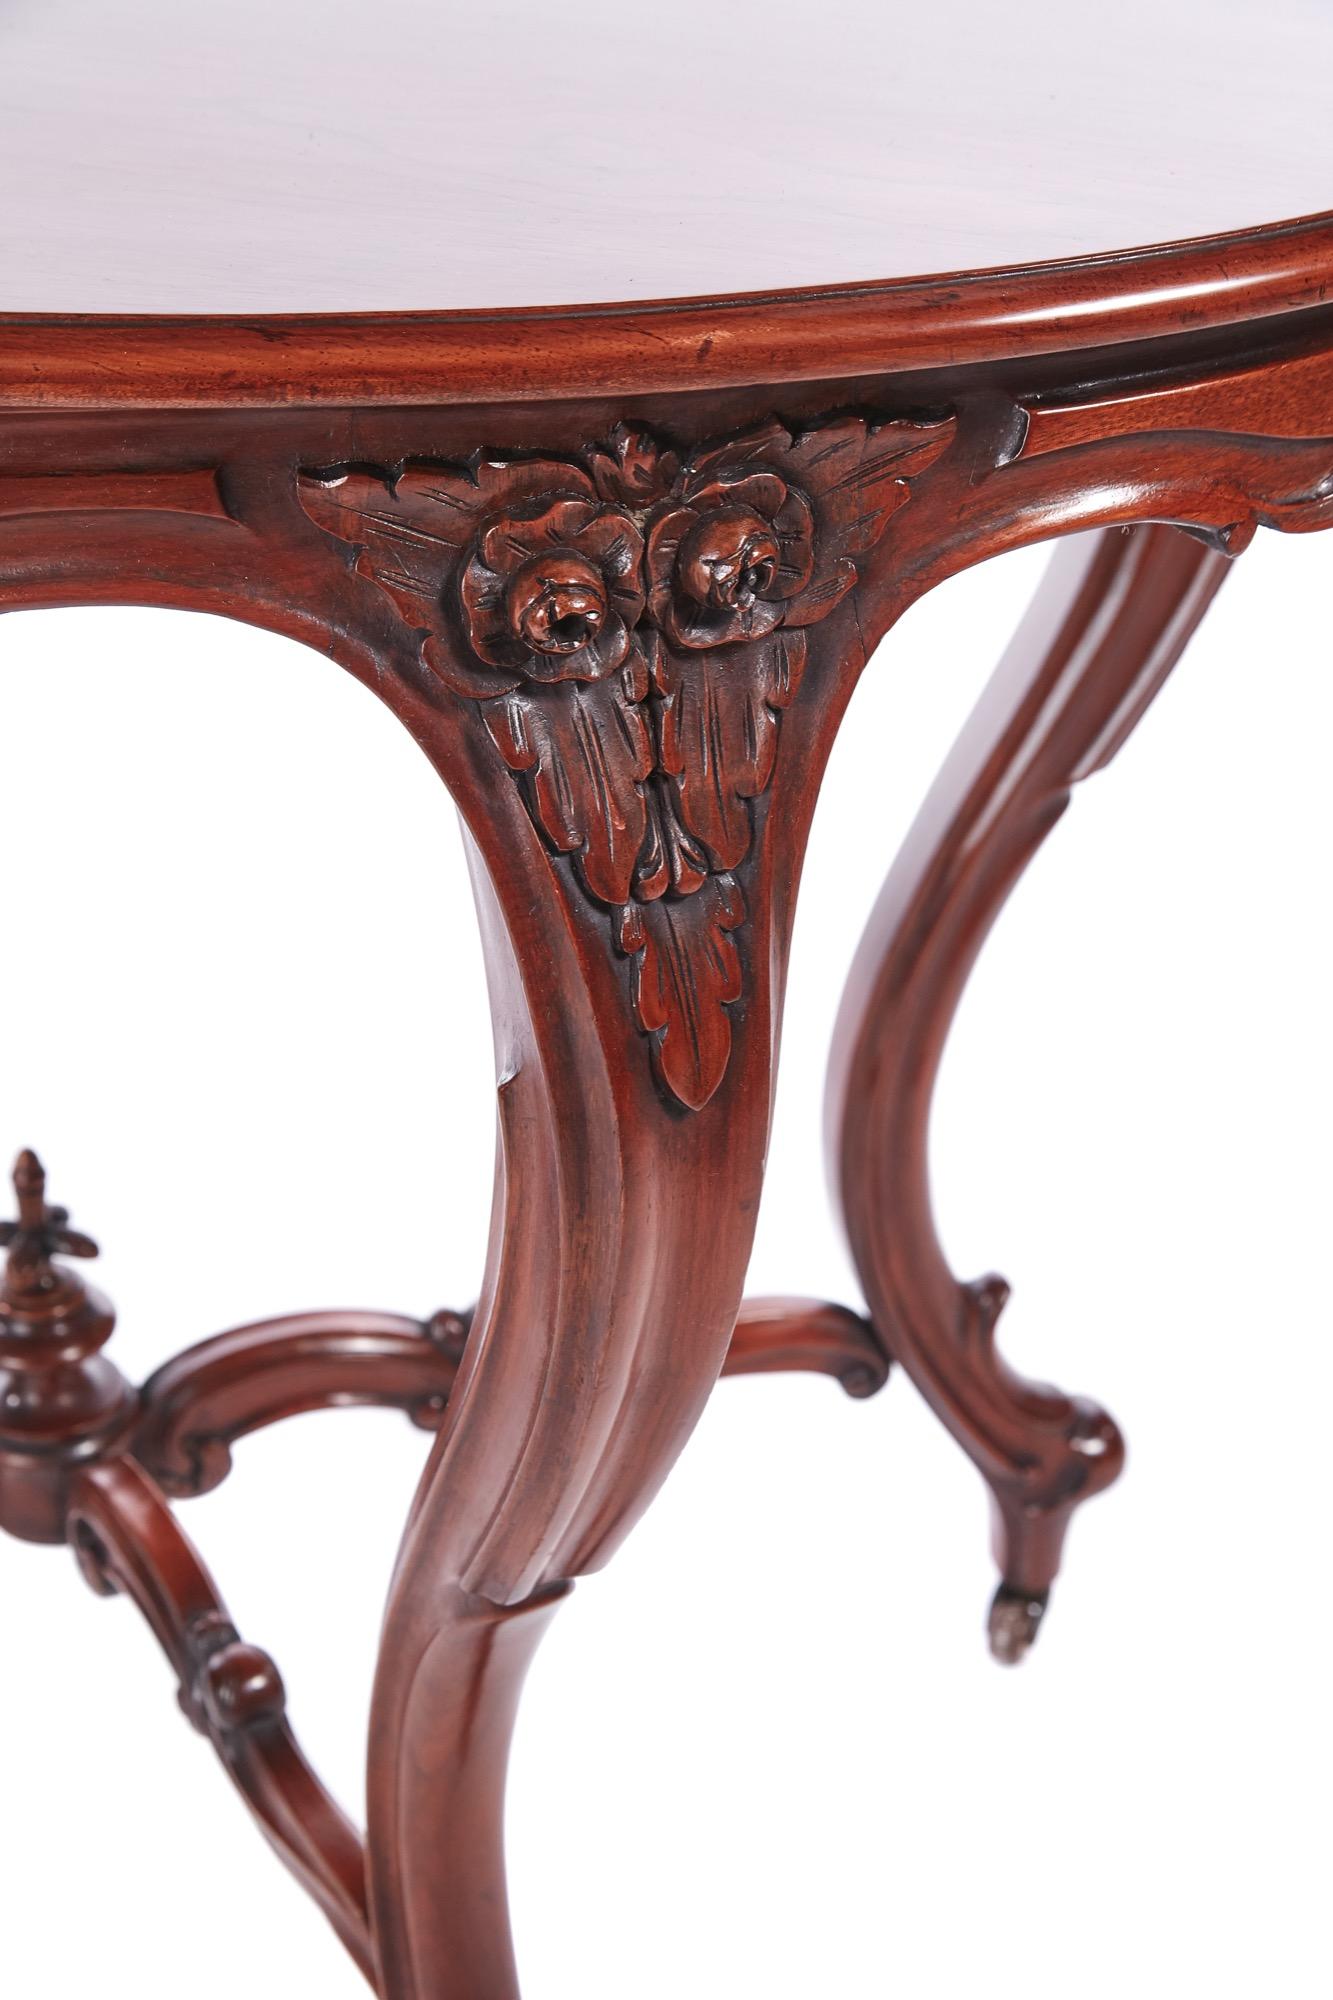 Antique Victorian oval carved walnut center table having a lovely walnut top with a thumb molded edge, lovely carved shaped frieze raised on 4 shaped carved cabriole legs untied by a shaped cross stretcher.
Lovely color and condition.
Measure: 41